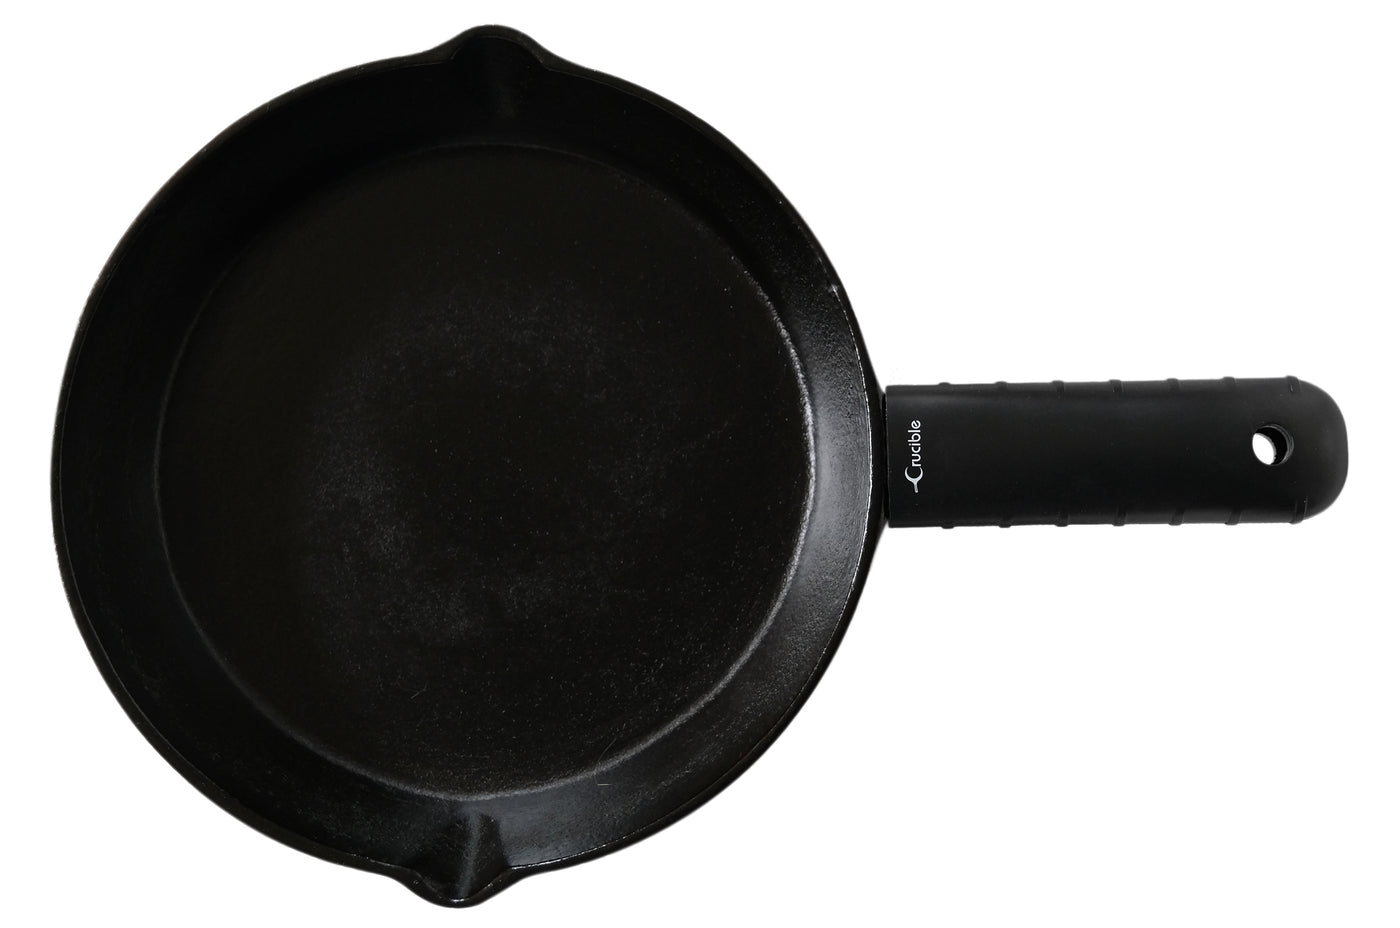 Silicone Potholder (Extra Thick Black) for Cast Iron Skillets and more